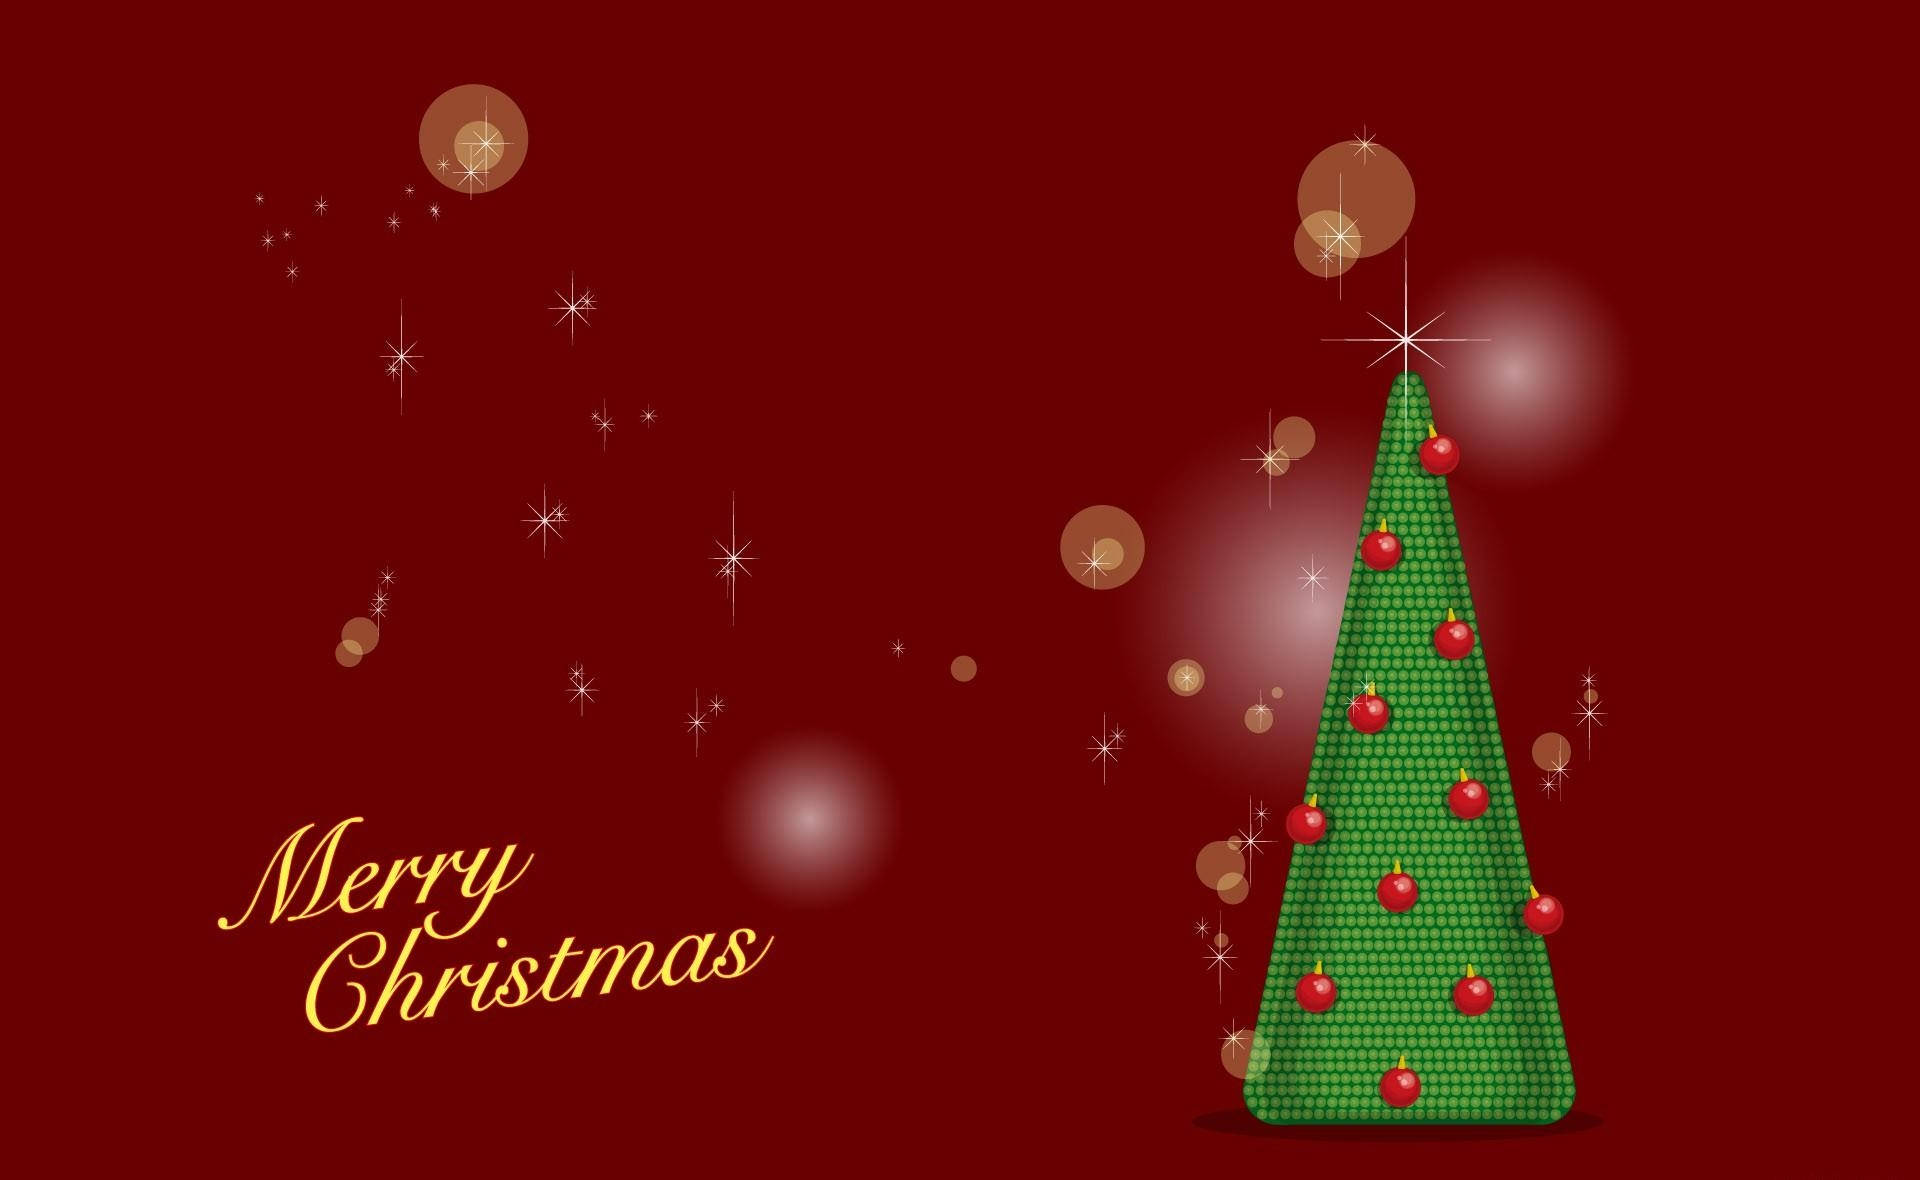 Christmas Tree  Celebrate a Jolly Christmas with a Red Christmas Tree Wallpaper